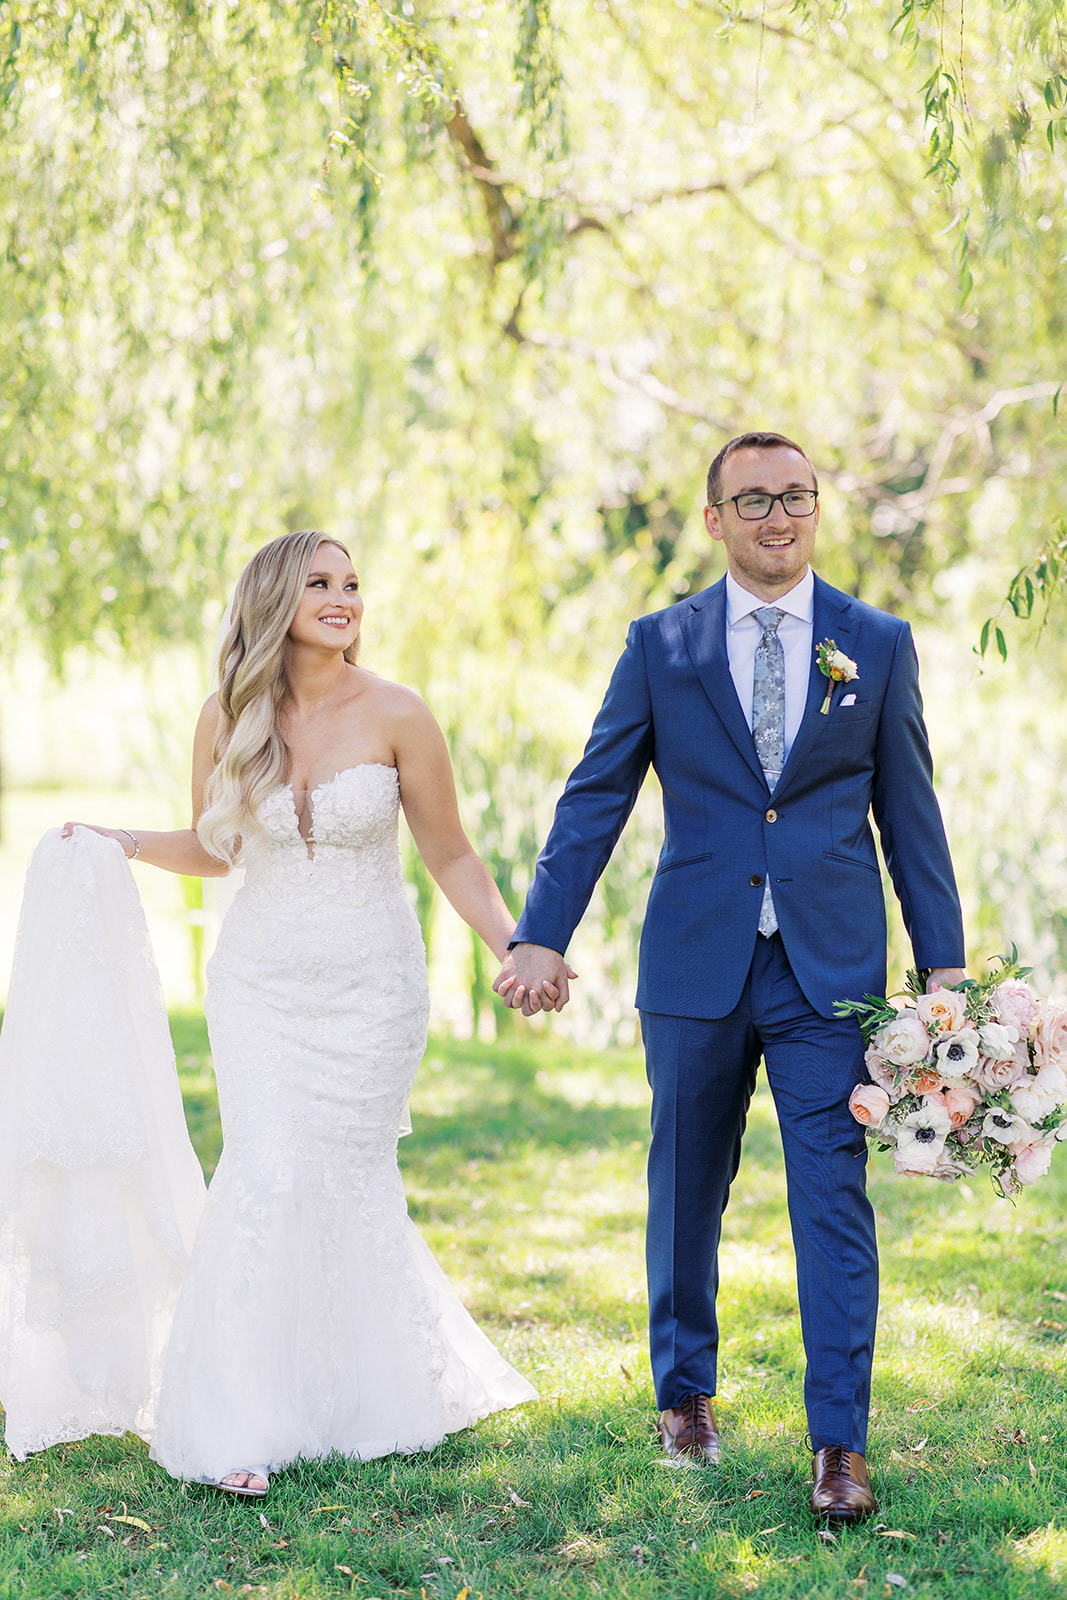 A groom in a blue suit leads his bride through a lawn by the hand while holding her bouquet